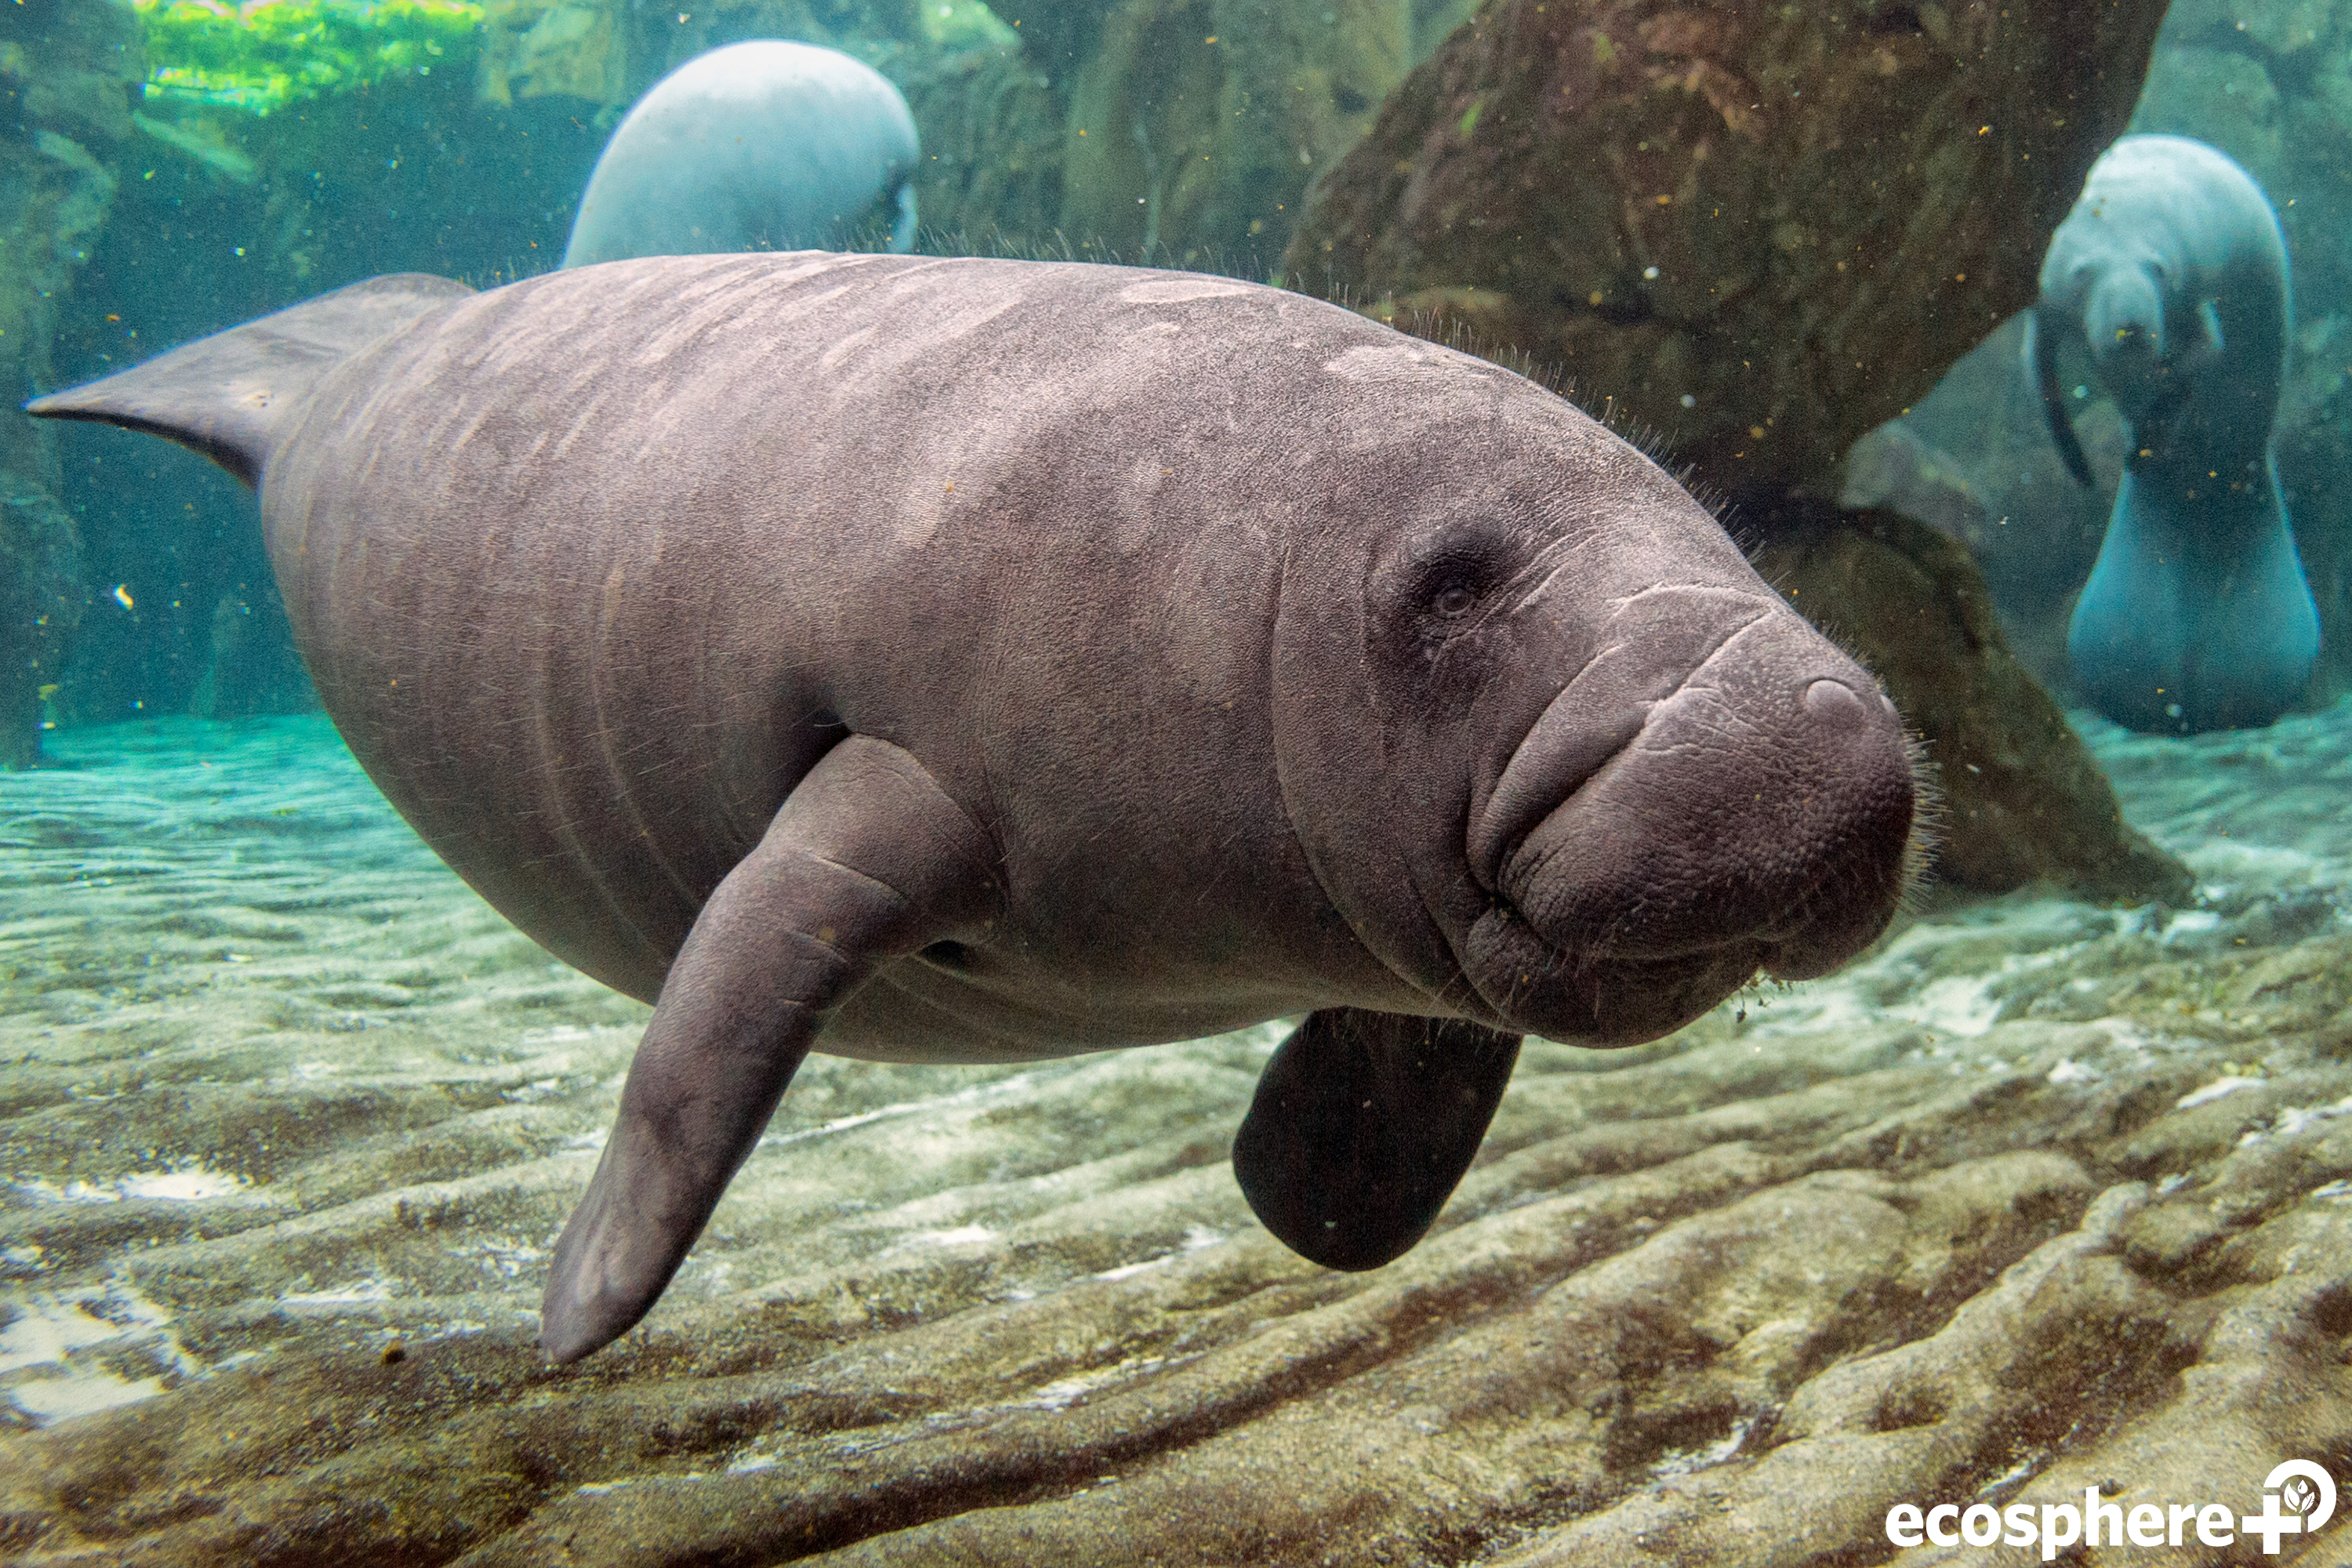 A home for the Manatee on the Conservation Coast